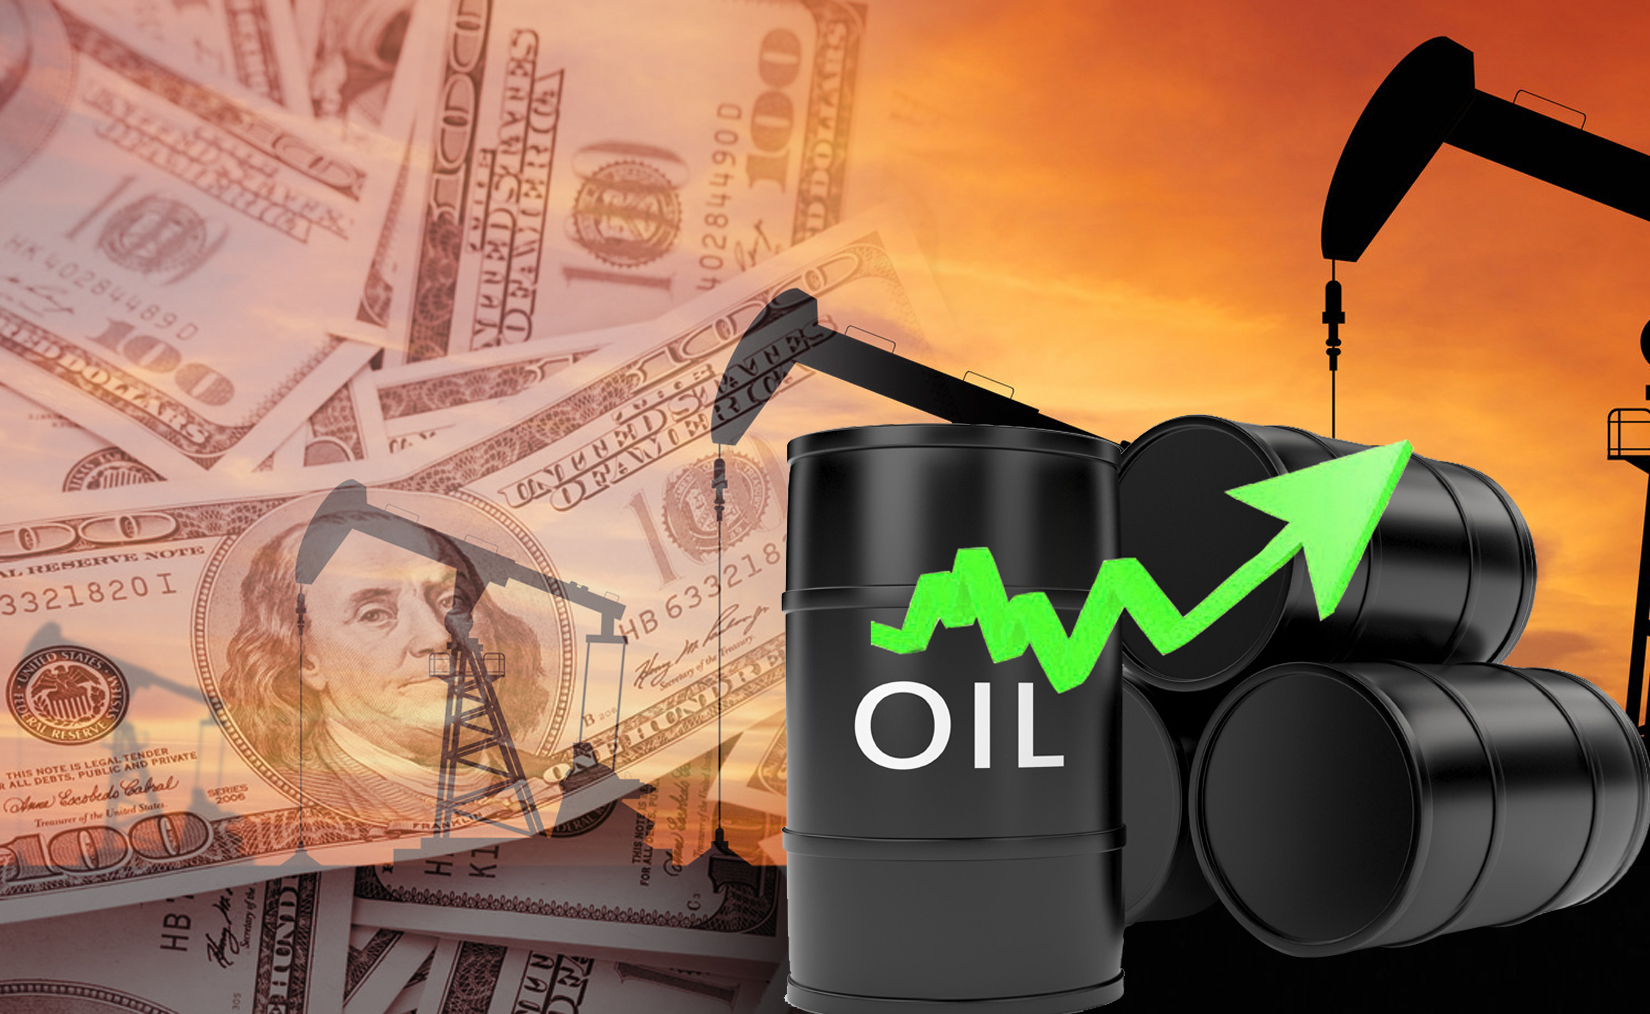 Kuwait oil price up 20 cents to USD 46.73 pb                                                                                                                                                                                                              